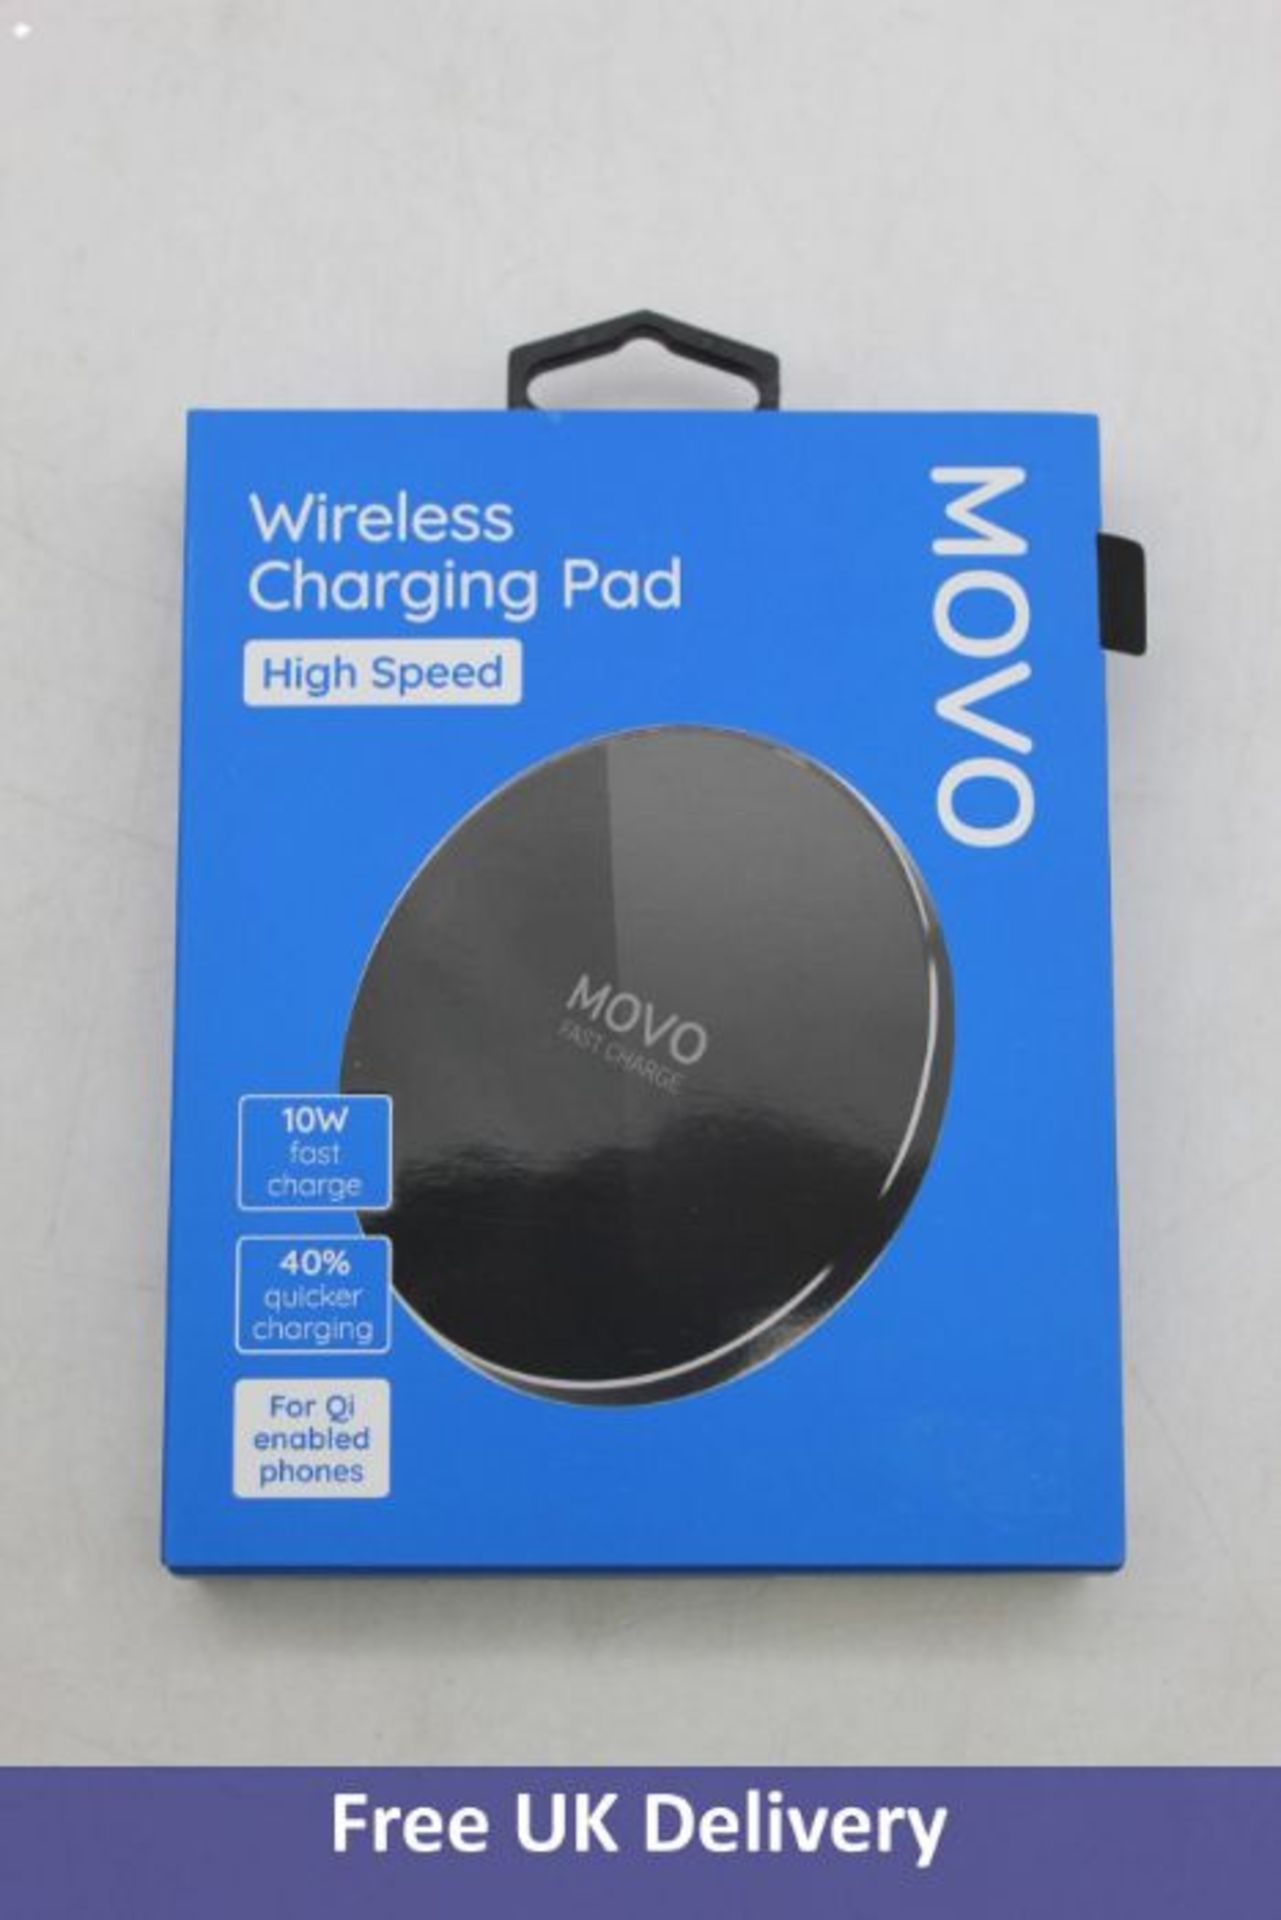 Fifteen Movo High Speed Wireless Charging Pads